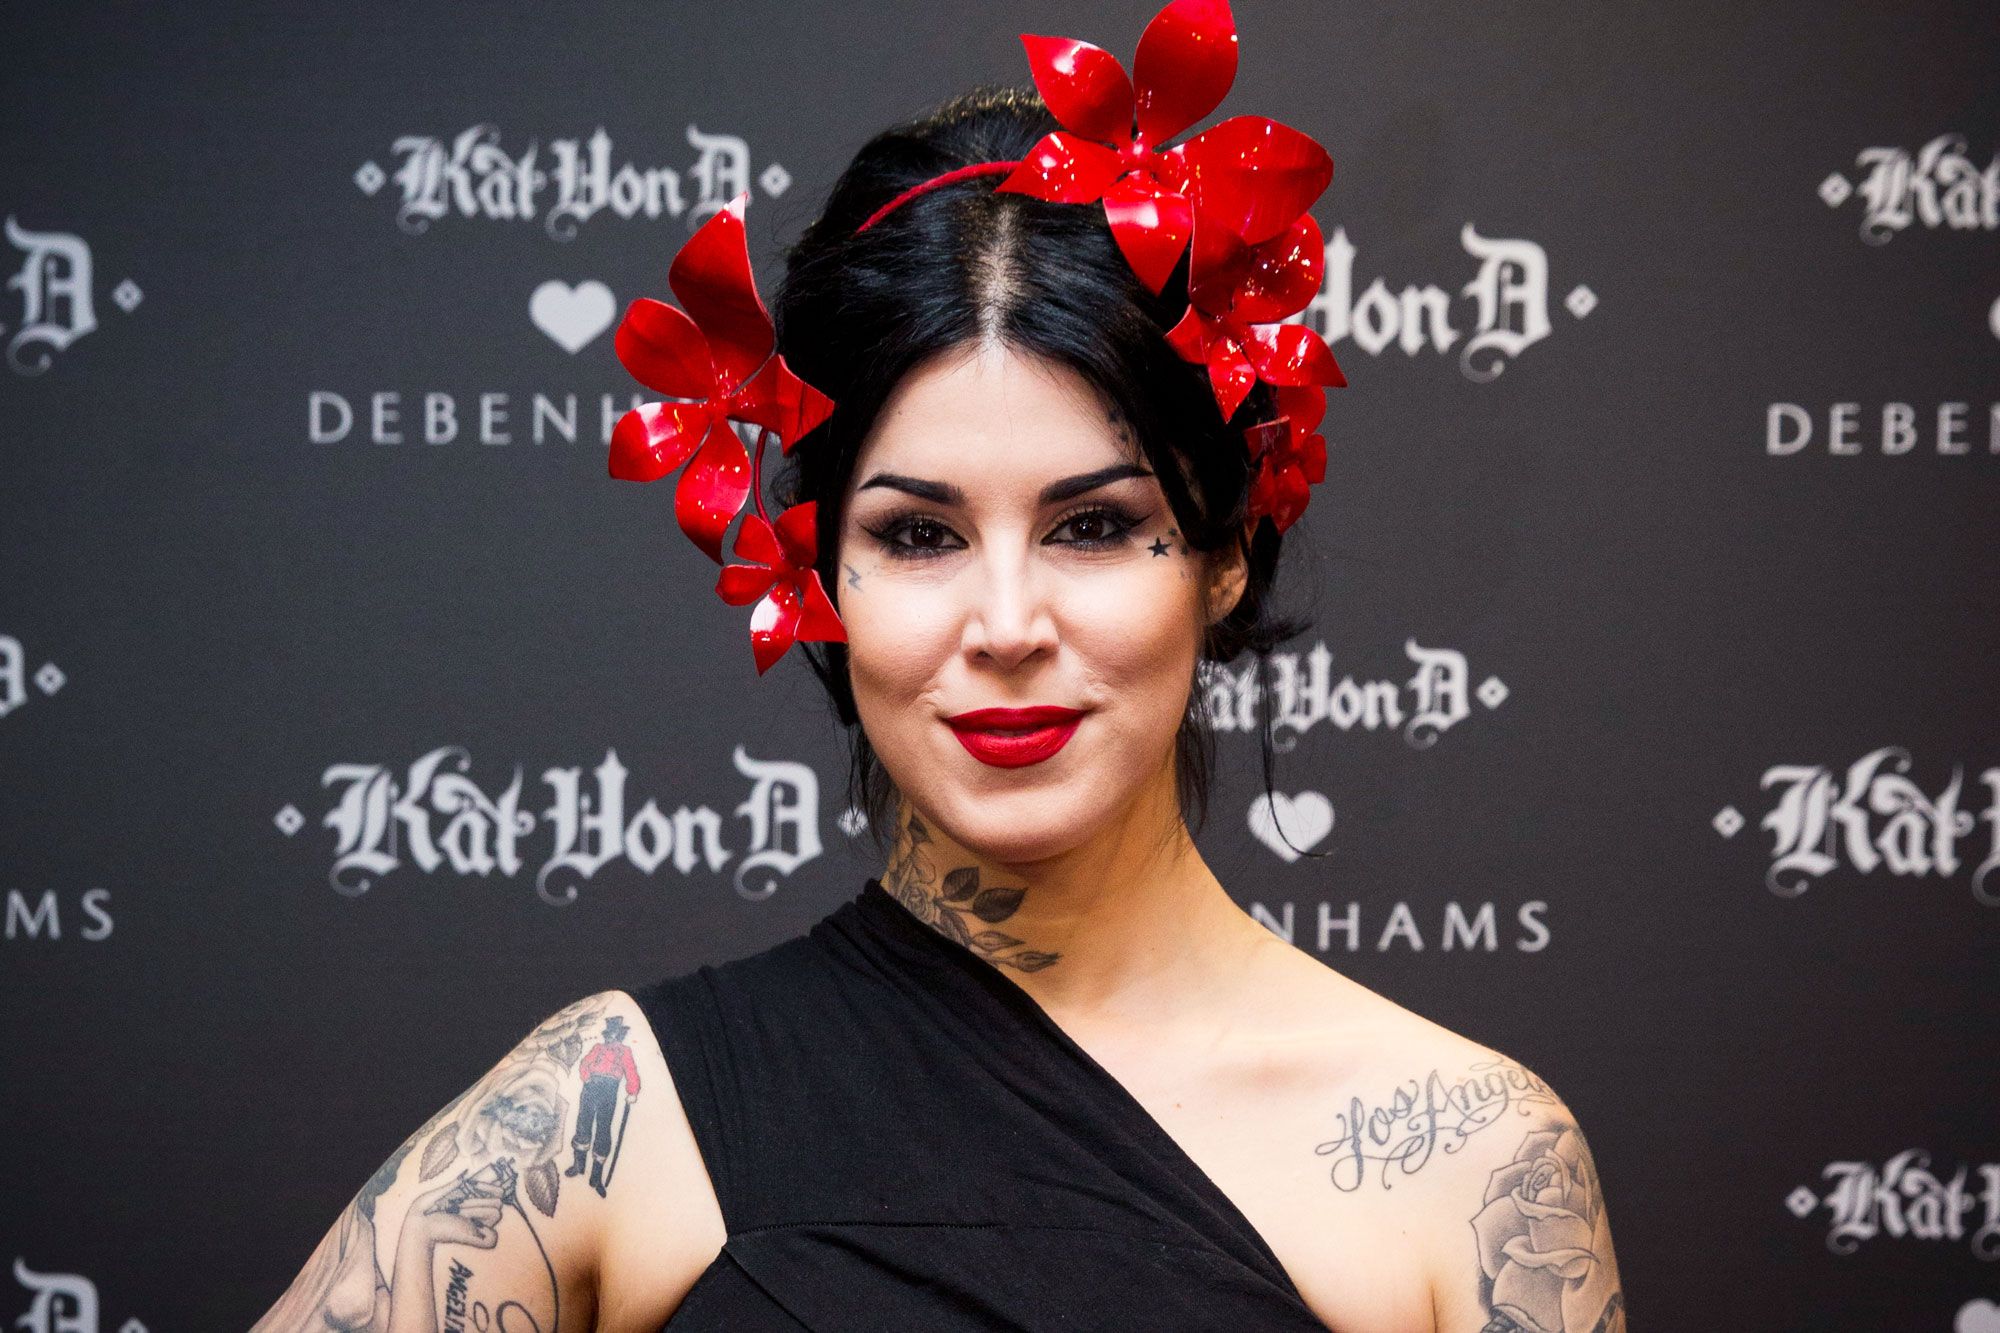 Tag væk konsulent mindre Kat Von D Allegedly Disinvited a Trump Supporter to a Party